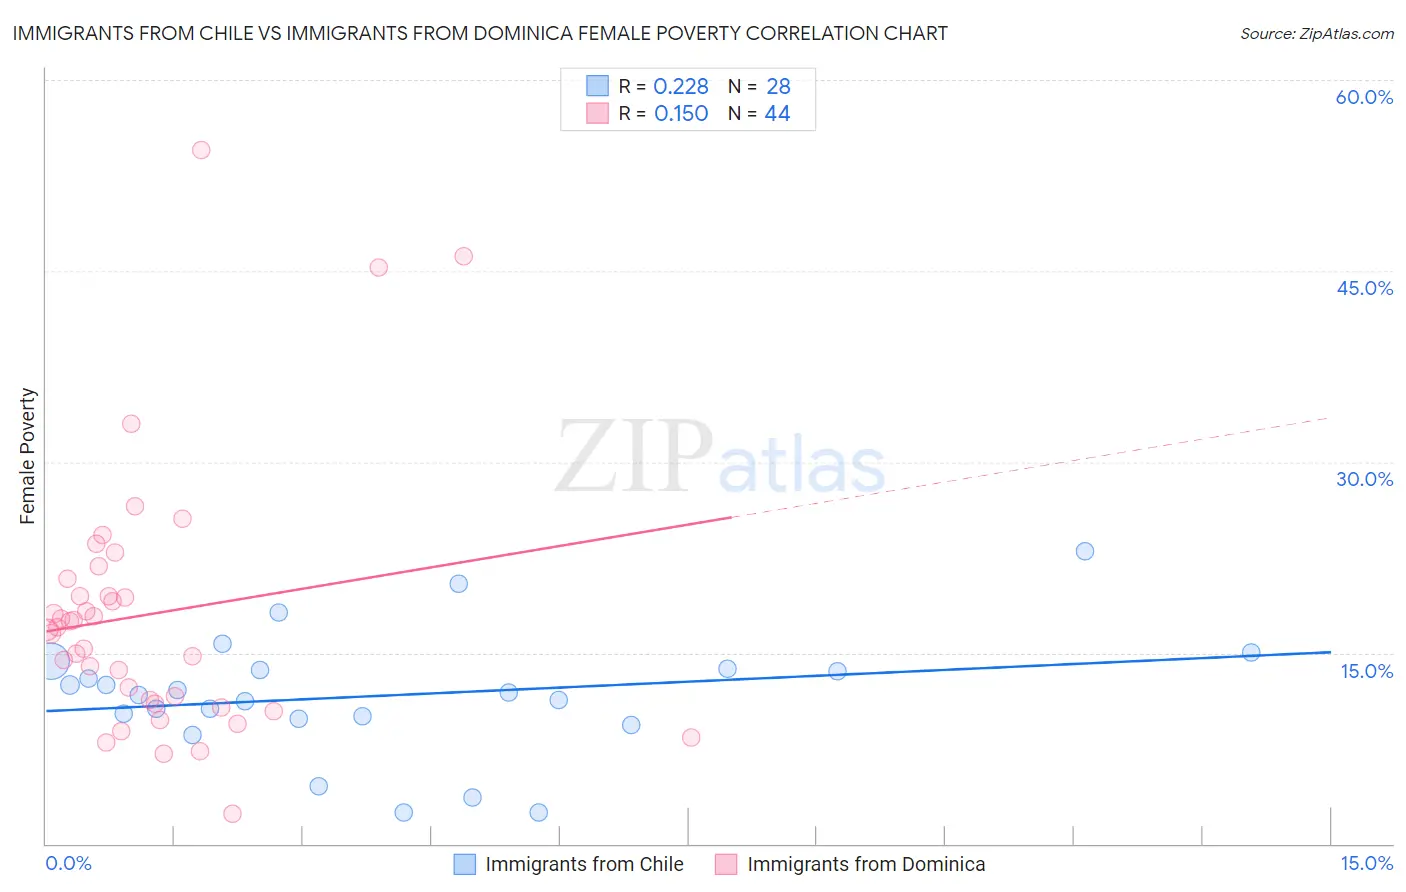 Immigrants from Chile vs Immigrants from Dominica Female Poverty